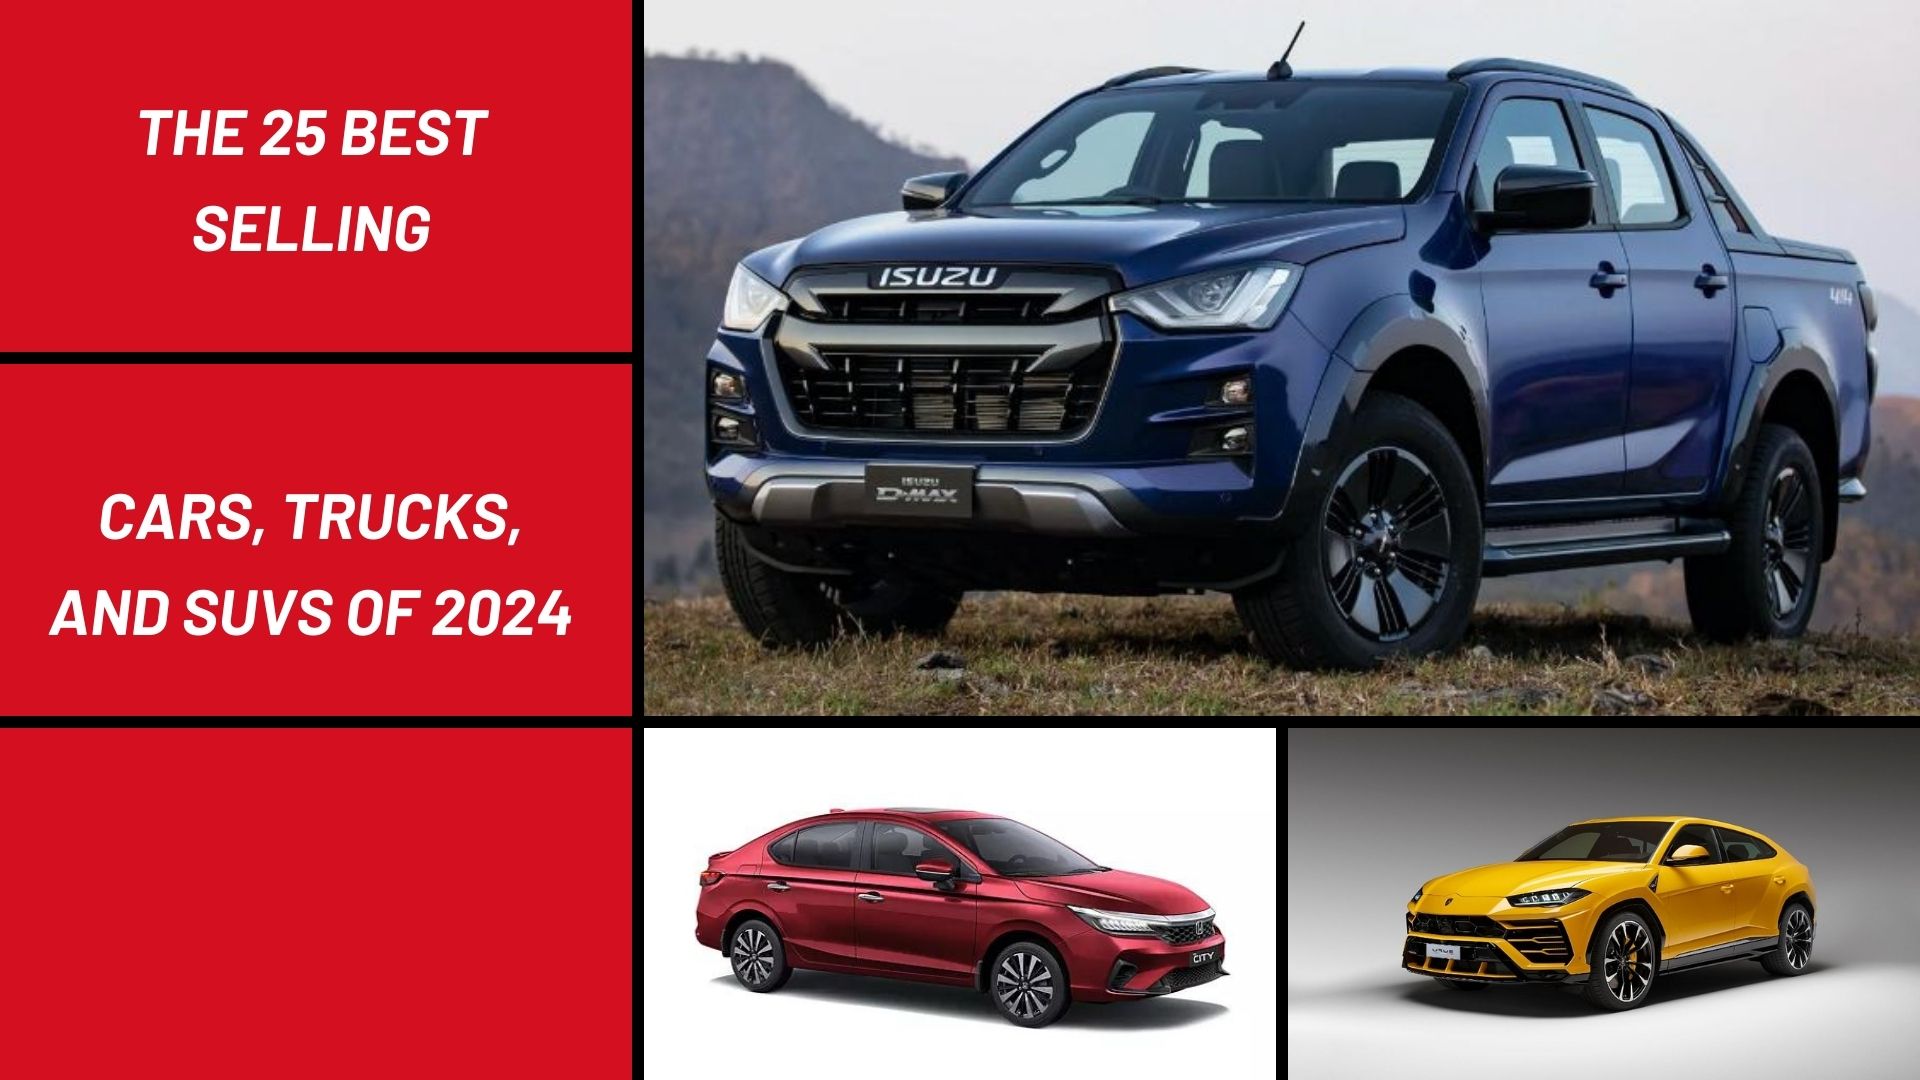 The 25 Best selling Cars,Trucks, and SUVs